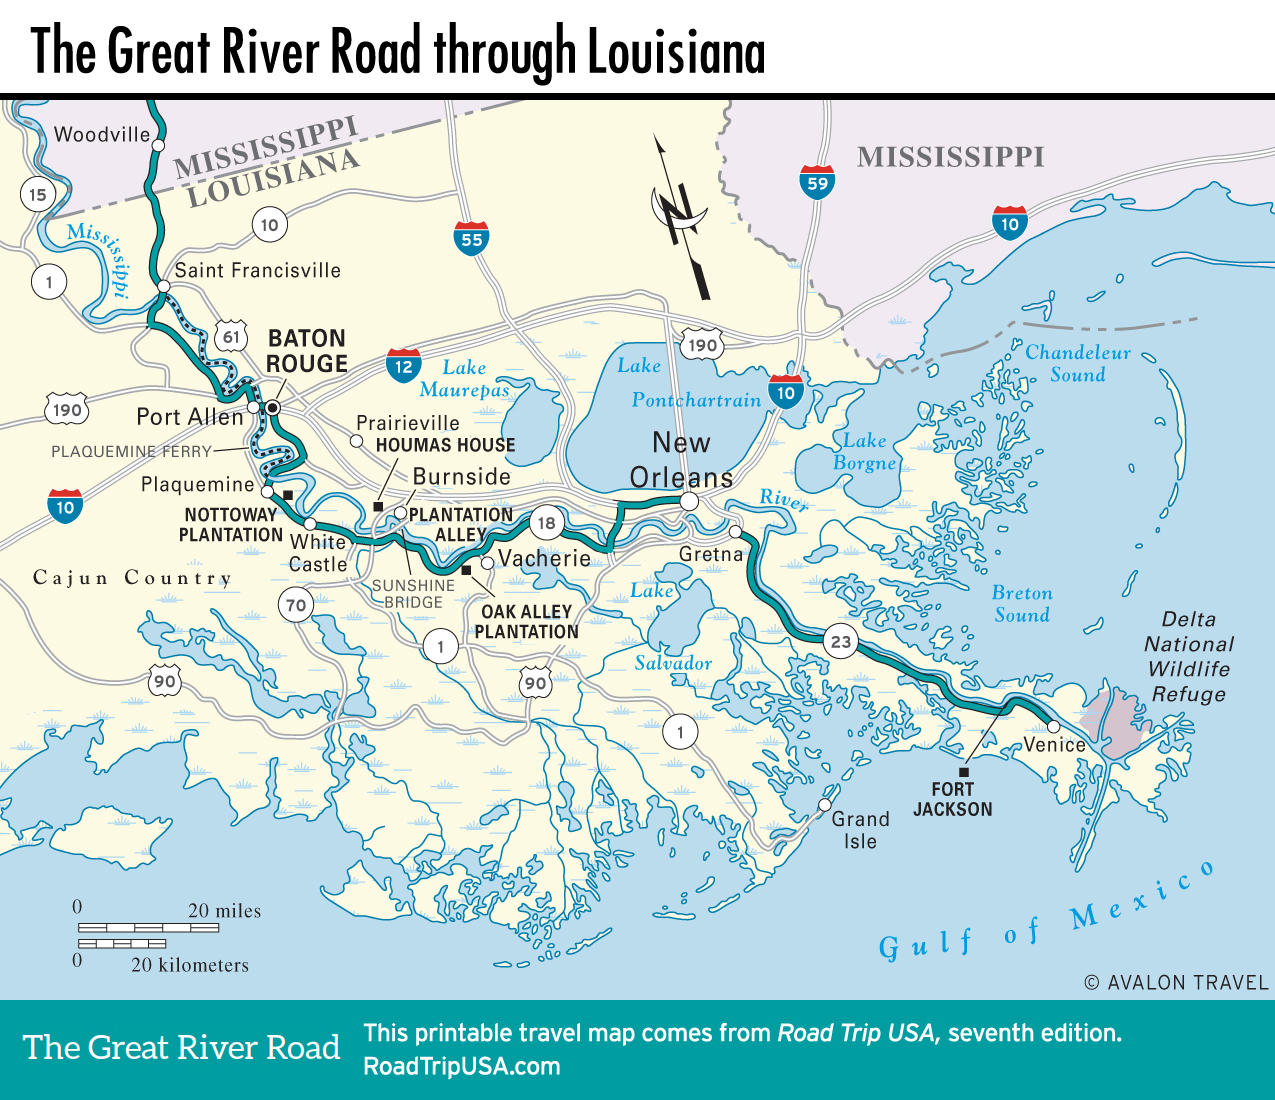 Great River Road - Louisiana Donaldsonville/New Orleans Area